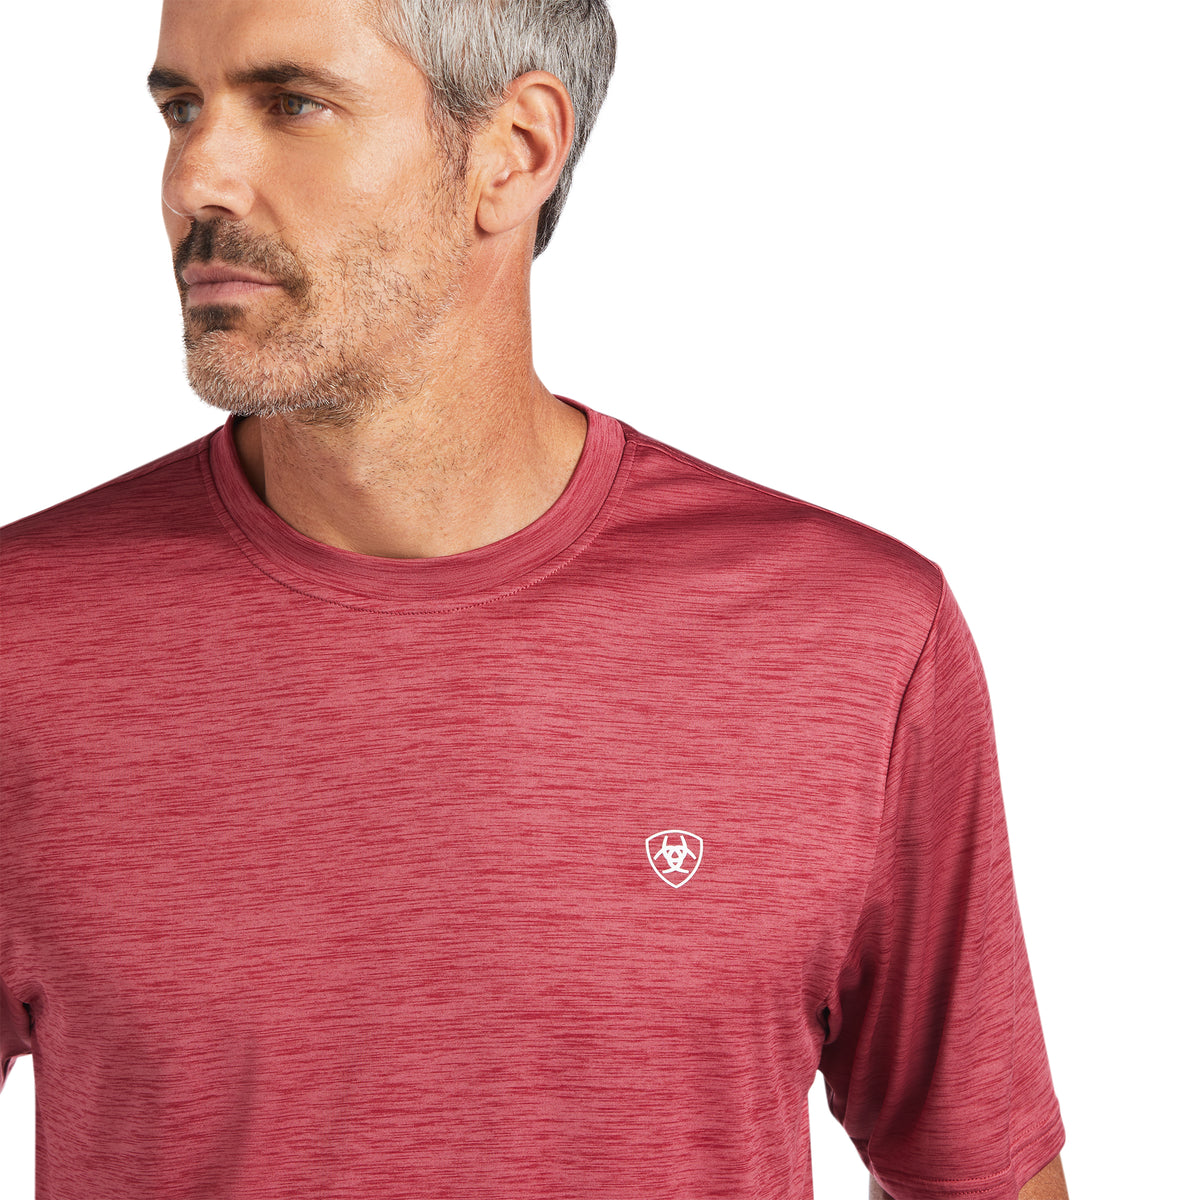 Ariat Charger Basic Tee